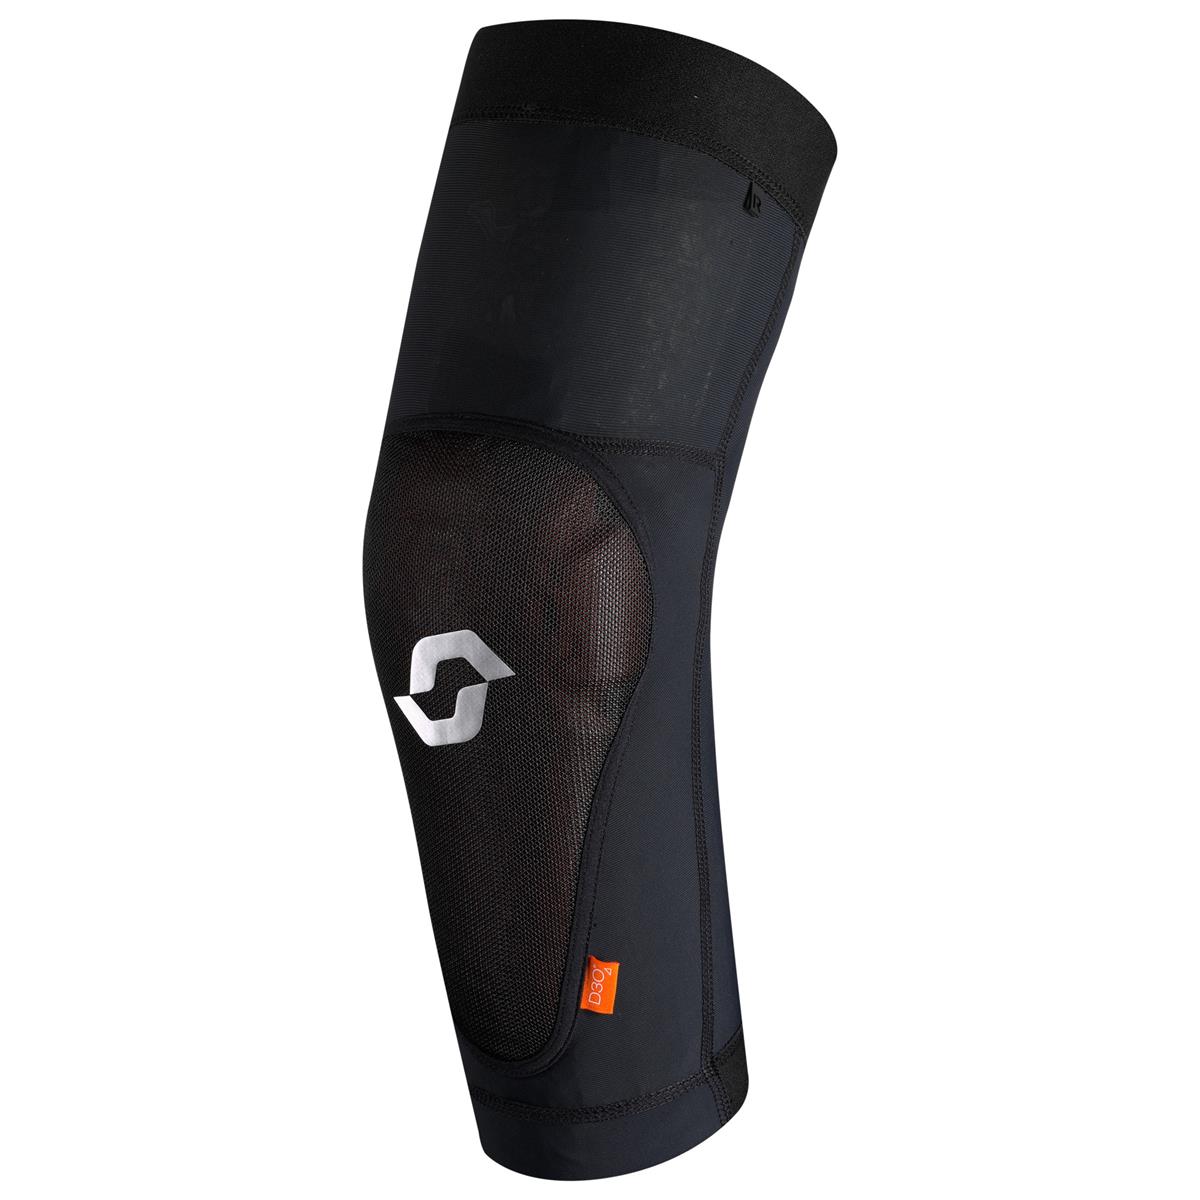 Elbow guards Softcon 2 Black/Grey - Size L